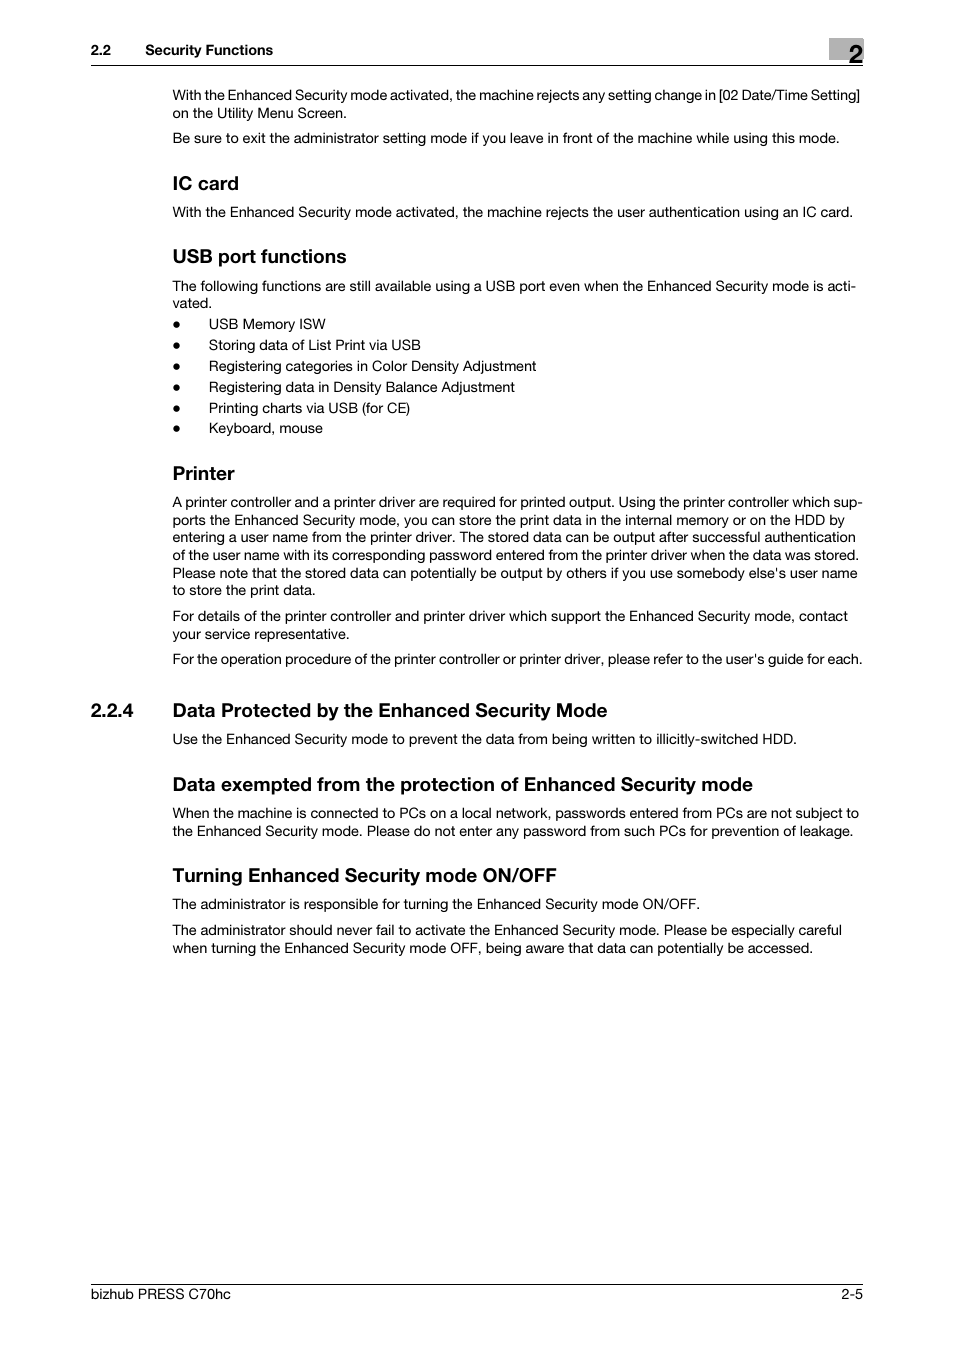 Ic card, Usb port functions, Printer | 4 data protected by the enhanced security mode, Turning enhanced security mode on/off, Data protected by the enhanced security mode -5 | Konica Minolta bizhub PRESS C70hc User Manual | Page 11 / 42